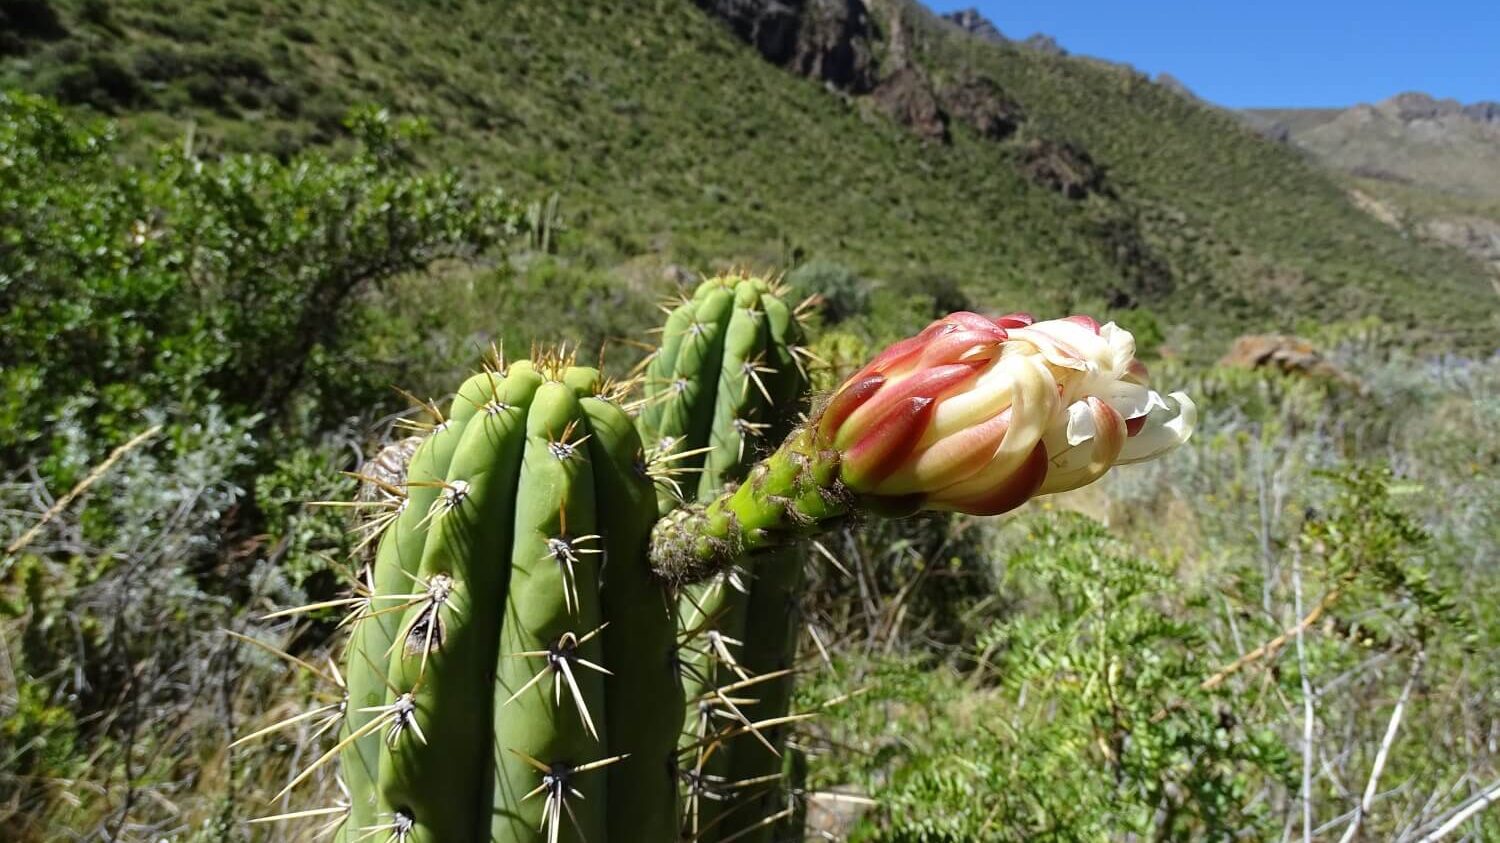 Cactus with flower in the Canocota Canyon. Hike the Collagua Route with RESPONSible Travel Peru